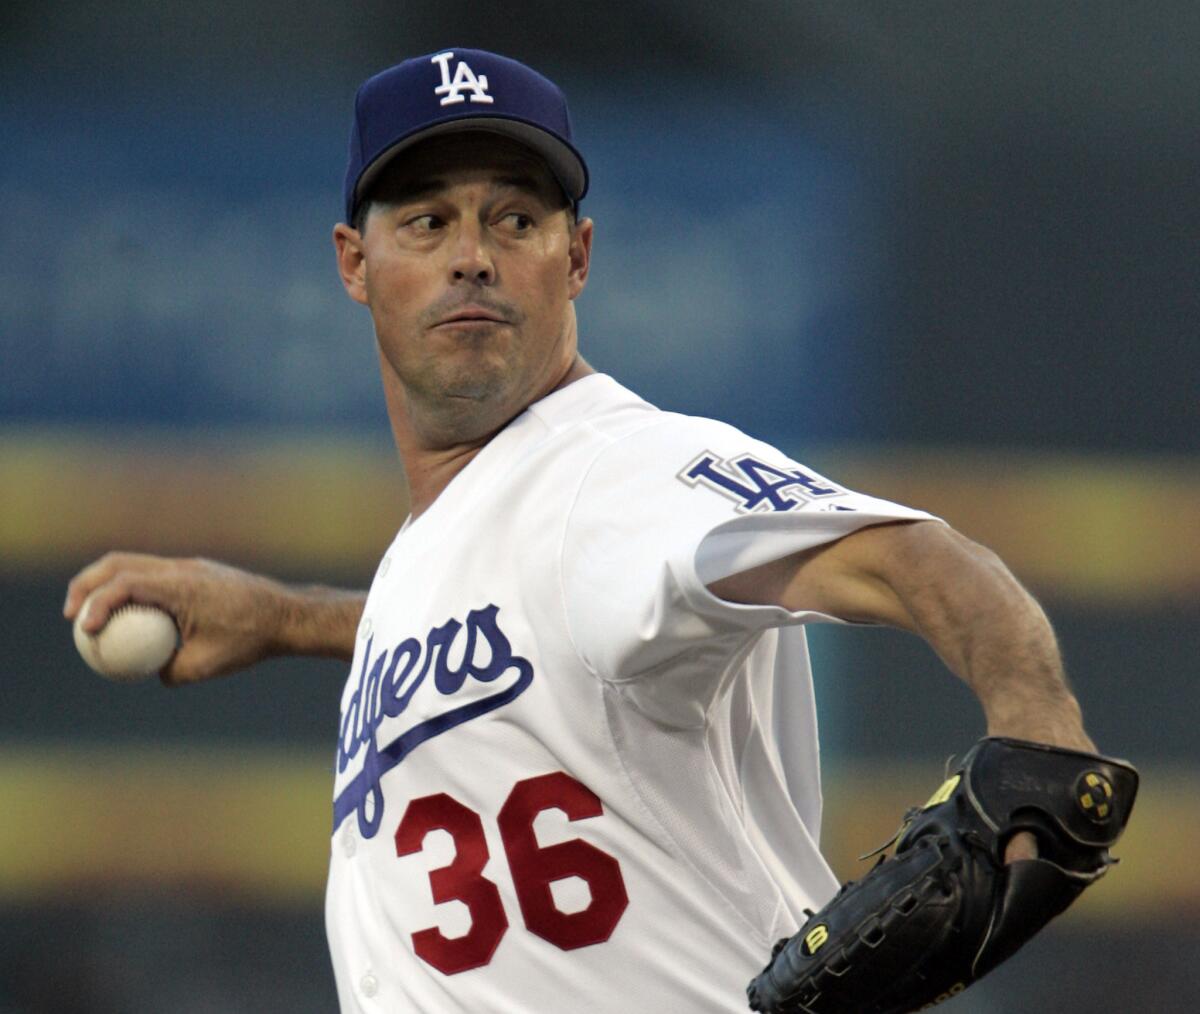 Does Greg Maddux make the cut as one of the five best right-handed starters ever?